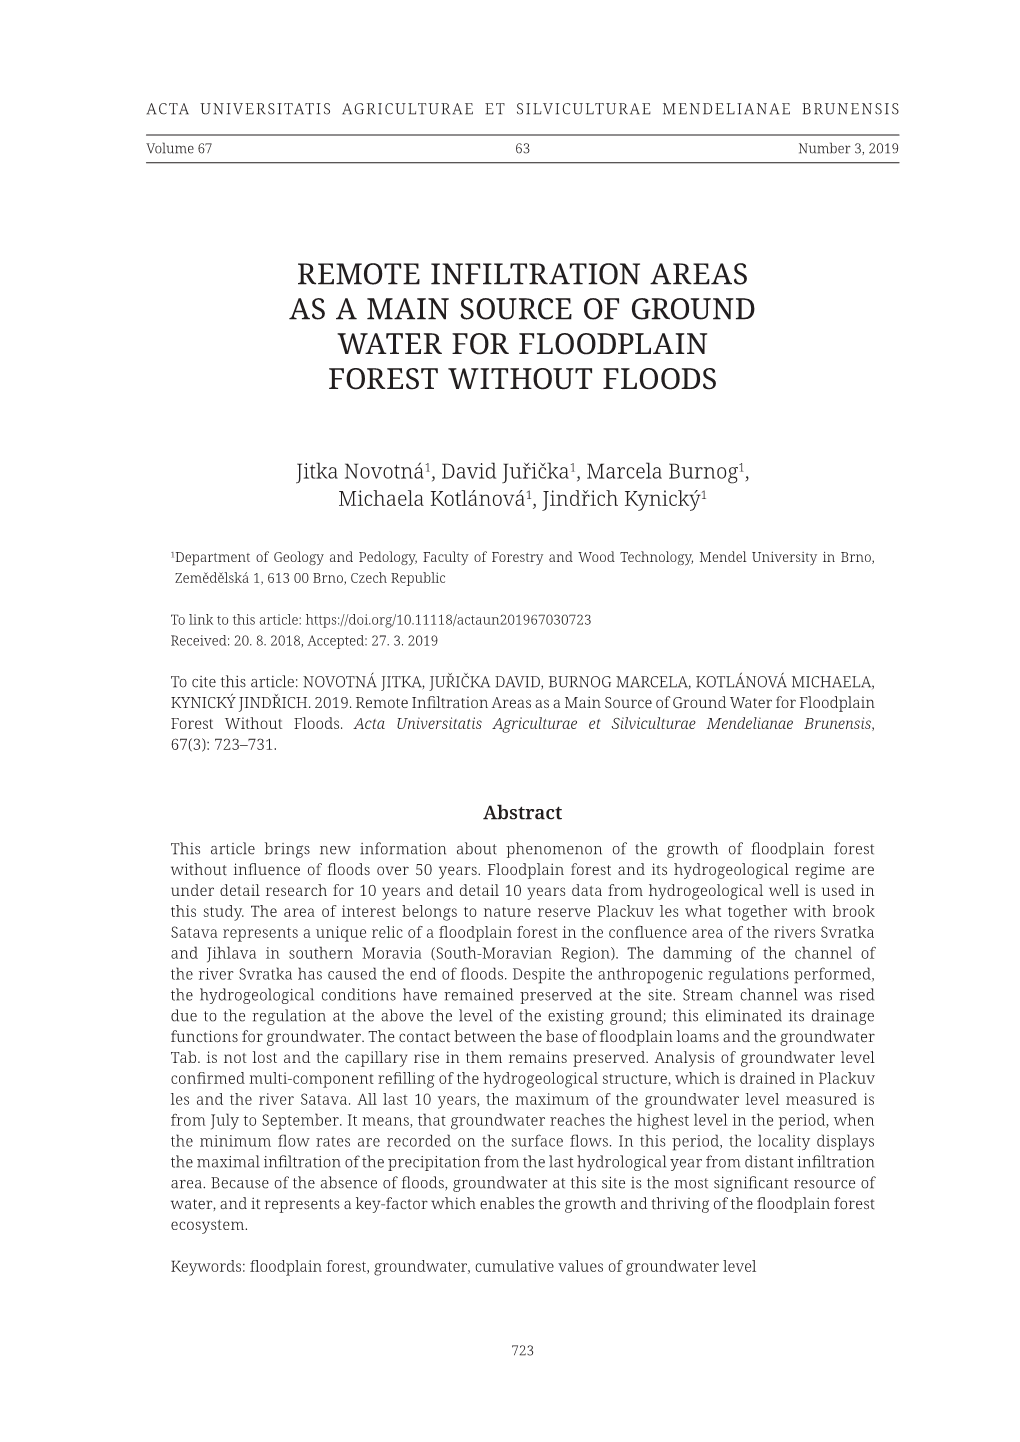 Remote Infiltration Areas As a Main Source of Ground Water for Floodplain Forest Without Floods